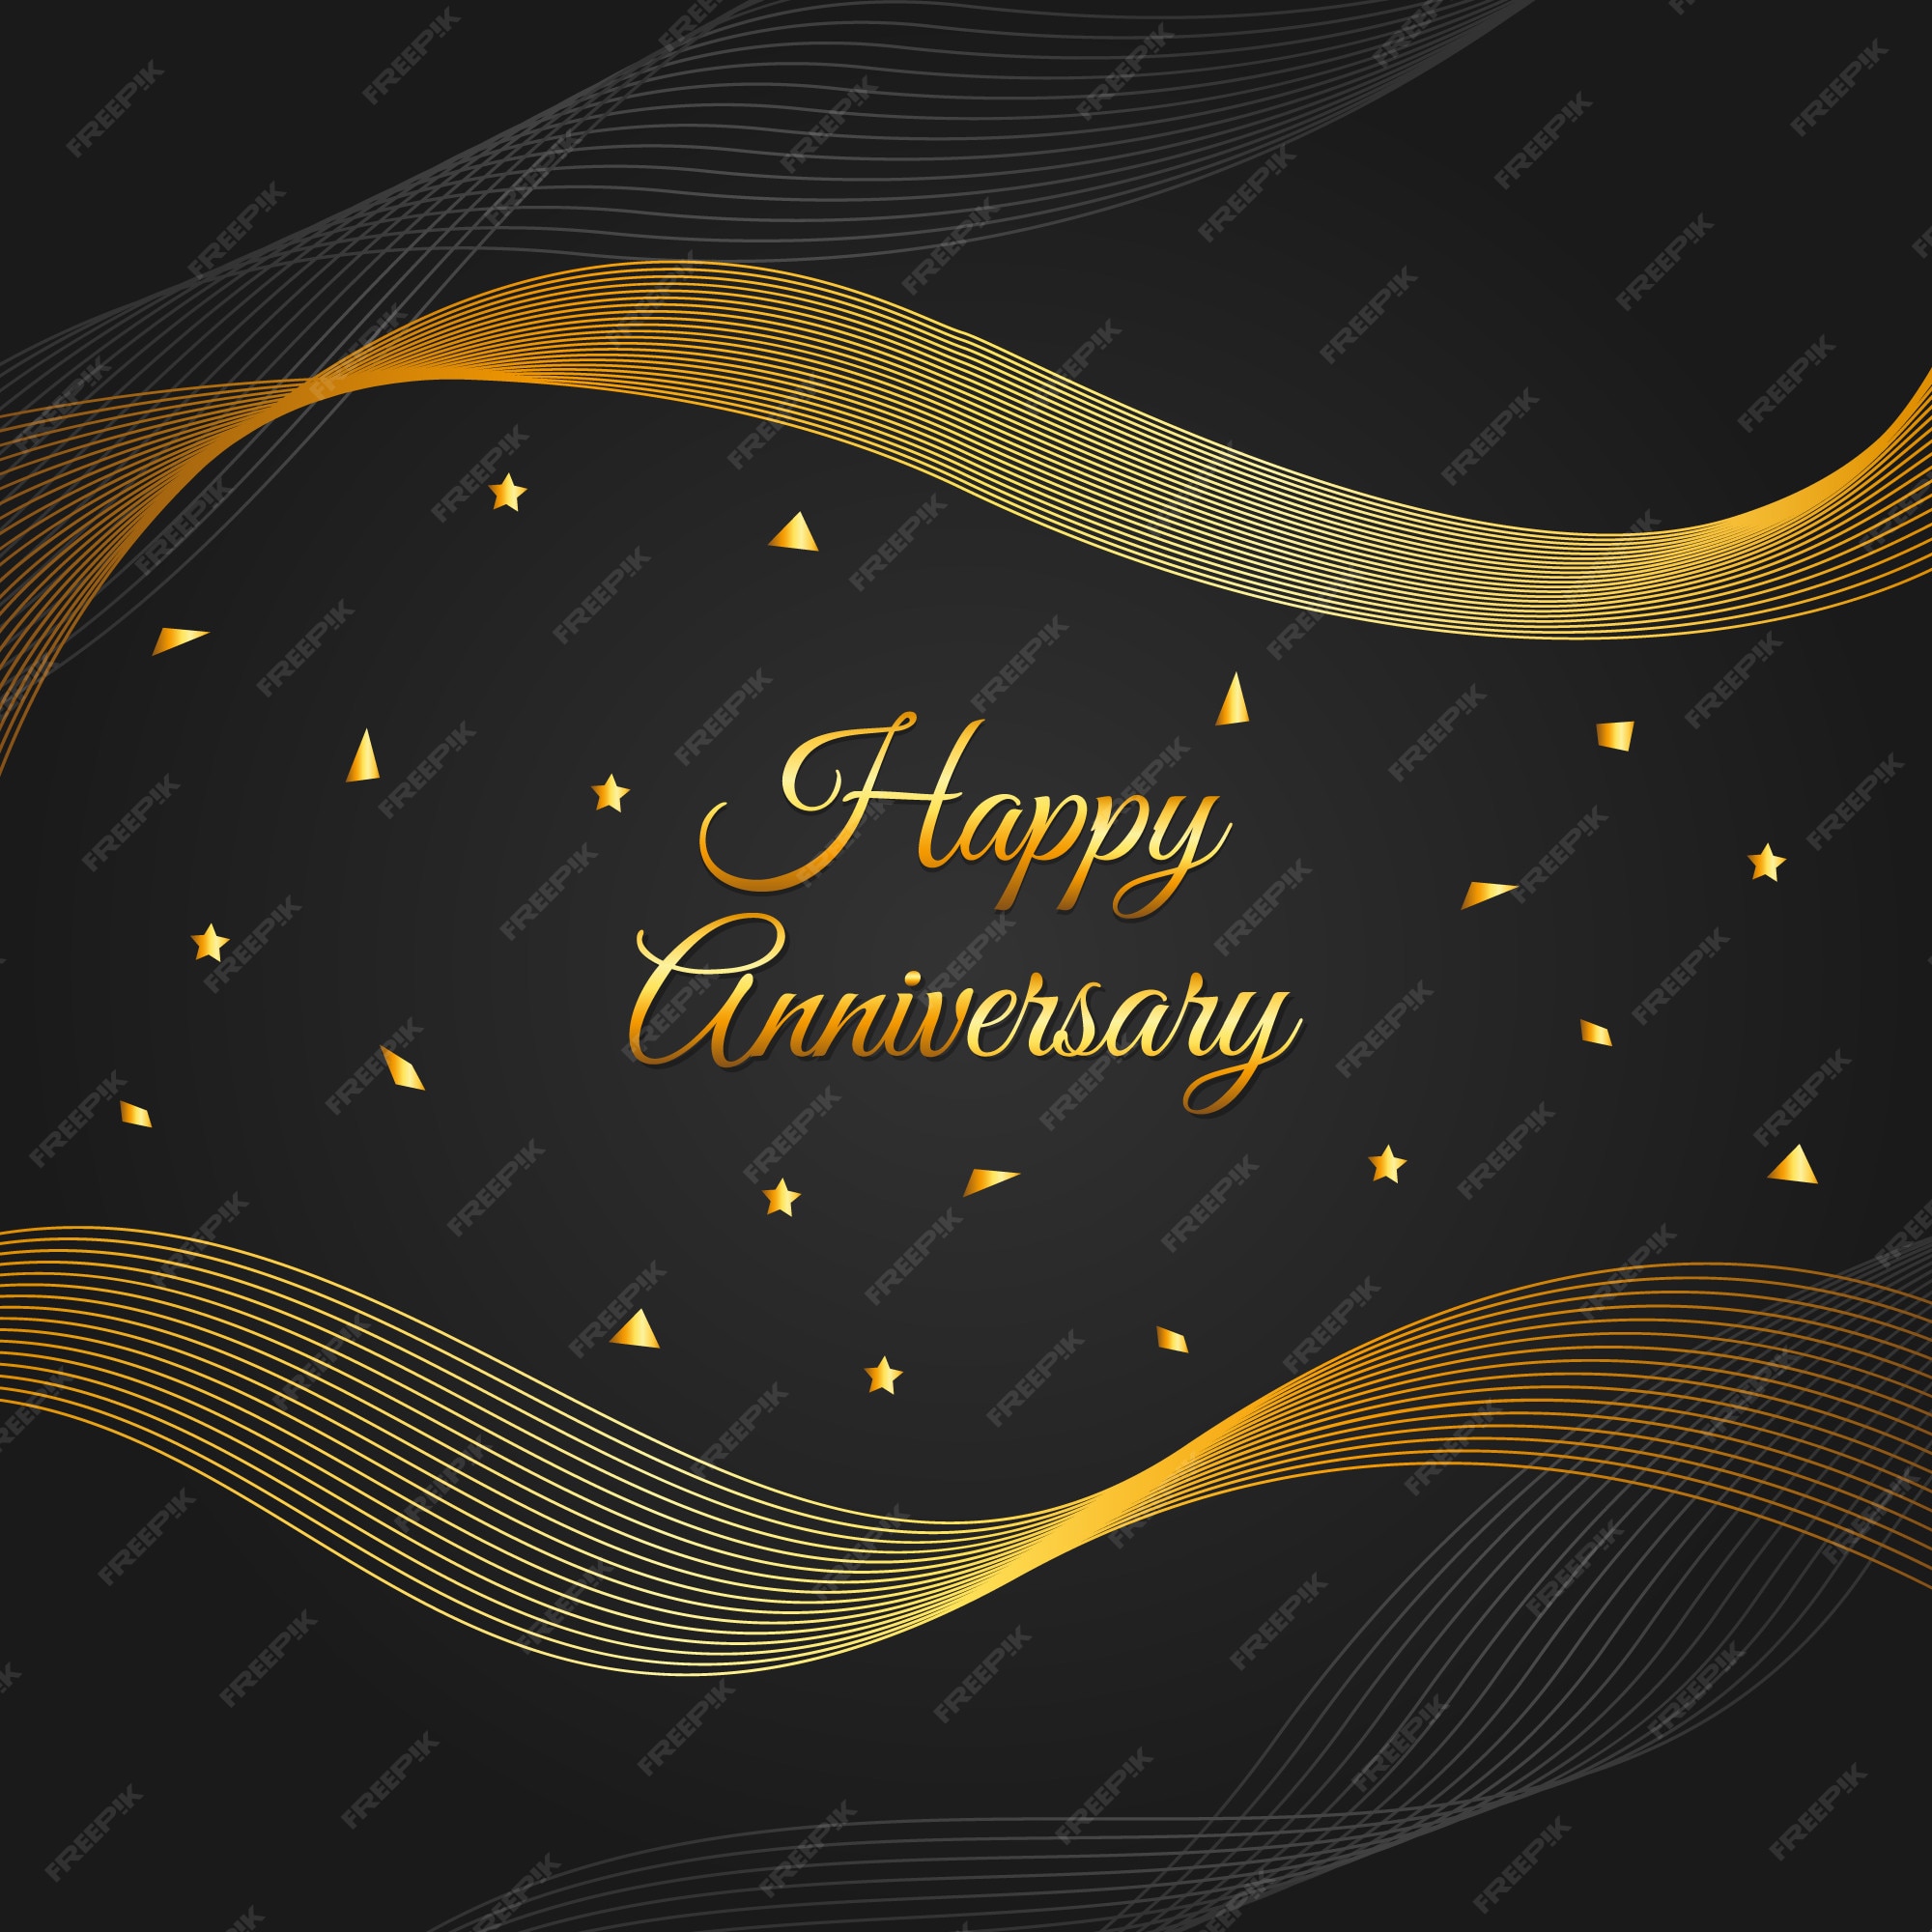 Page 2 | Happy Anniversary Background Images - Free Download on Freepik